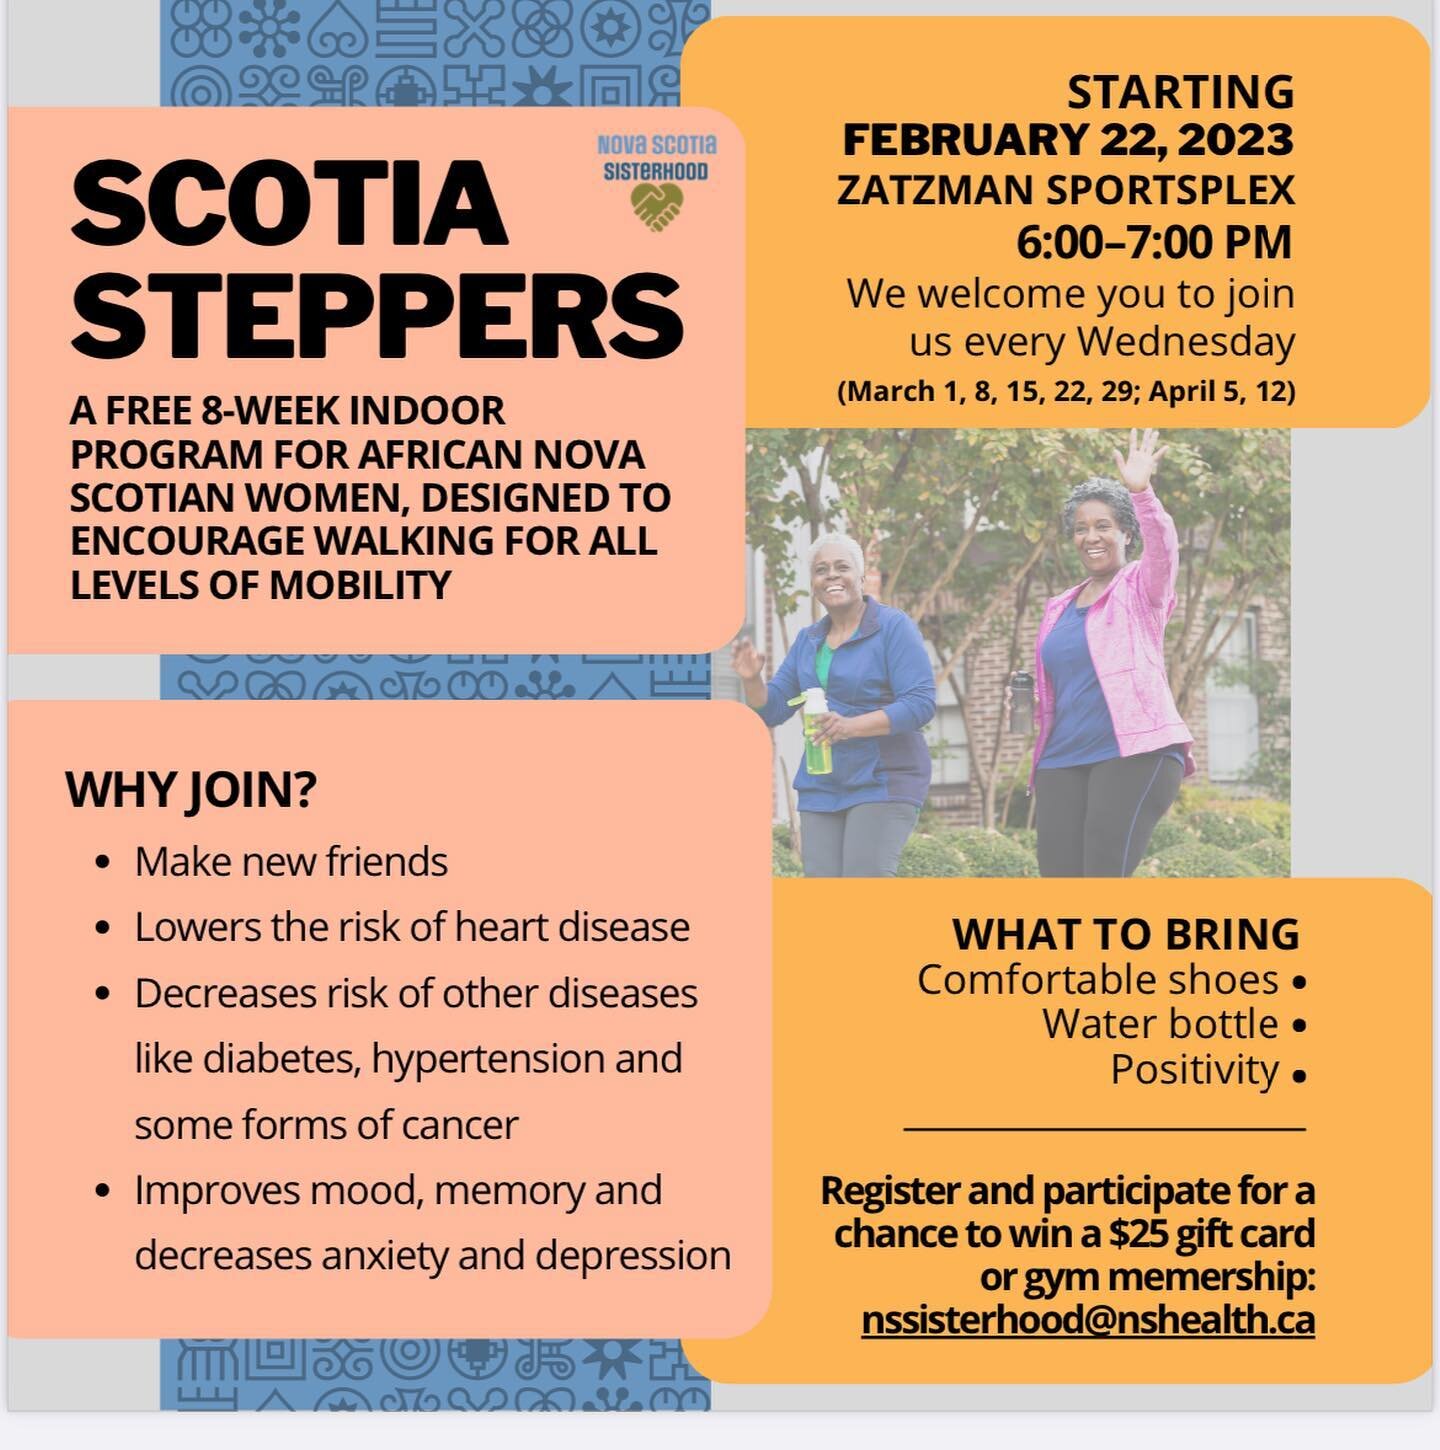 Did you know the NS sisterhood is hosting a free indoor walking program on Wednesdays at the @zsportsplex !

This program is for African Nova Scotian women. 

Here is a great way to slowly increase your physical activity, improve your overall health 